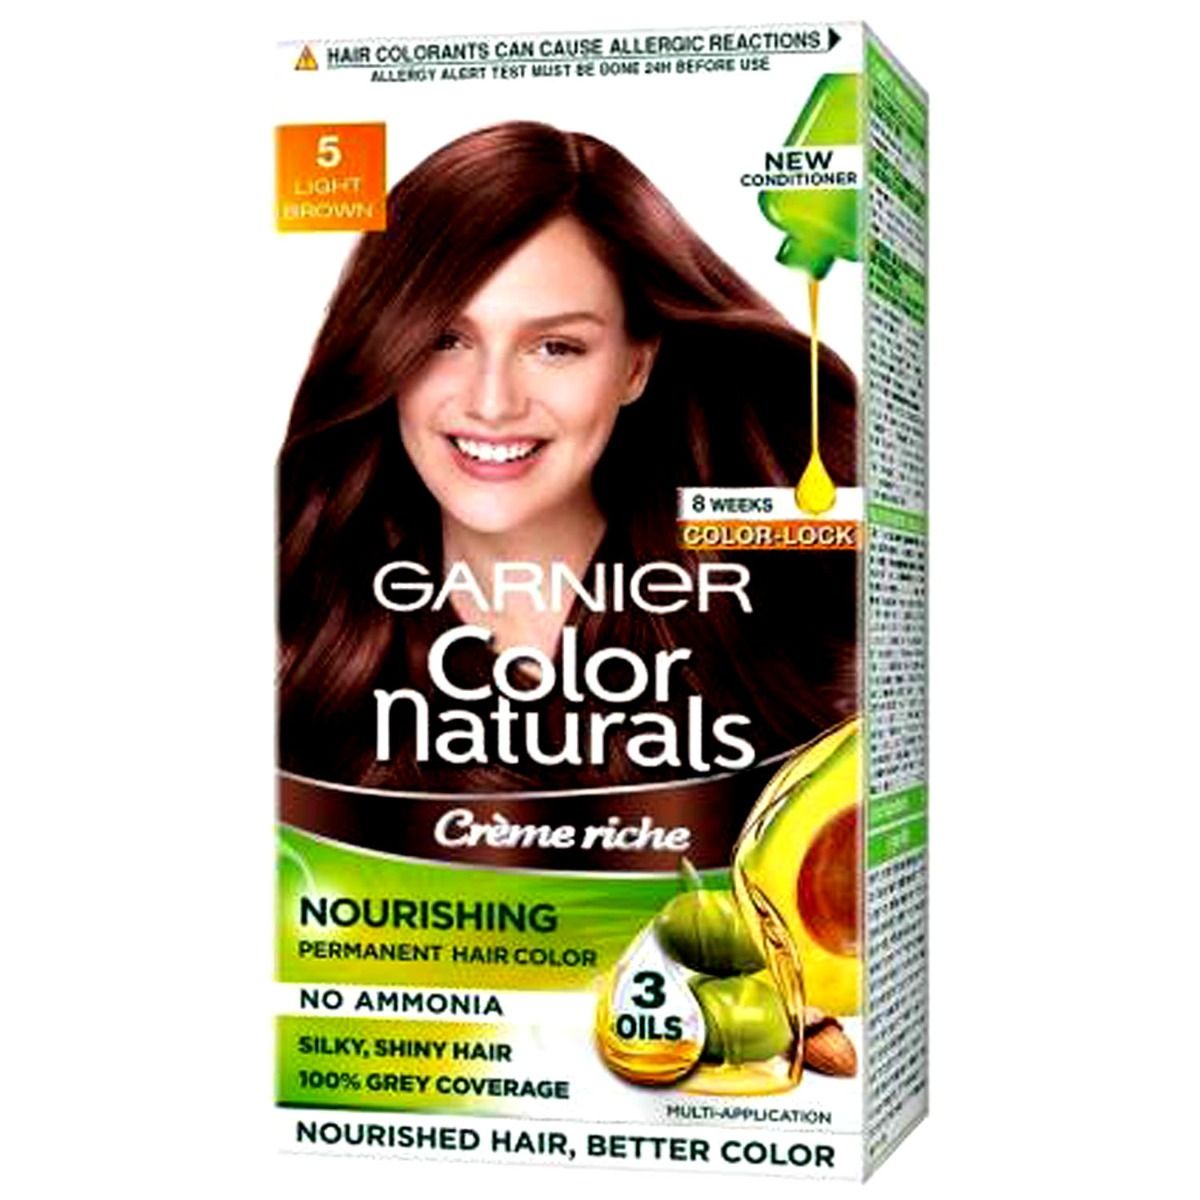 Garnier Color Naturals Shade 5 Hair Color, Light Brown, 1 Count Price,  Uses, Side Effects, Composition - Apollo Pharmacy